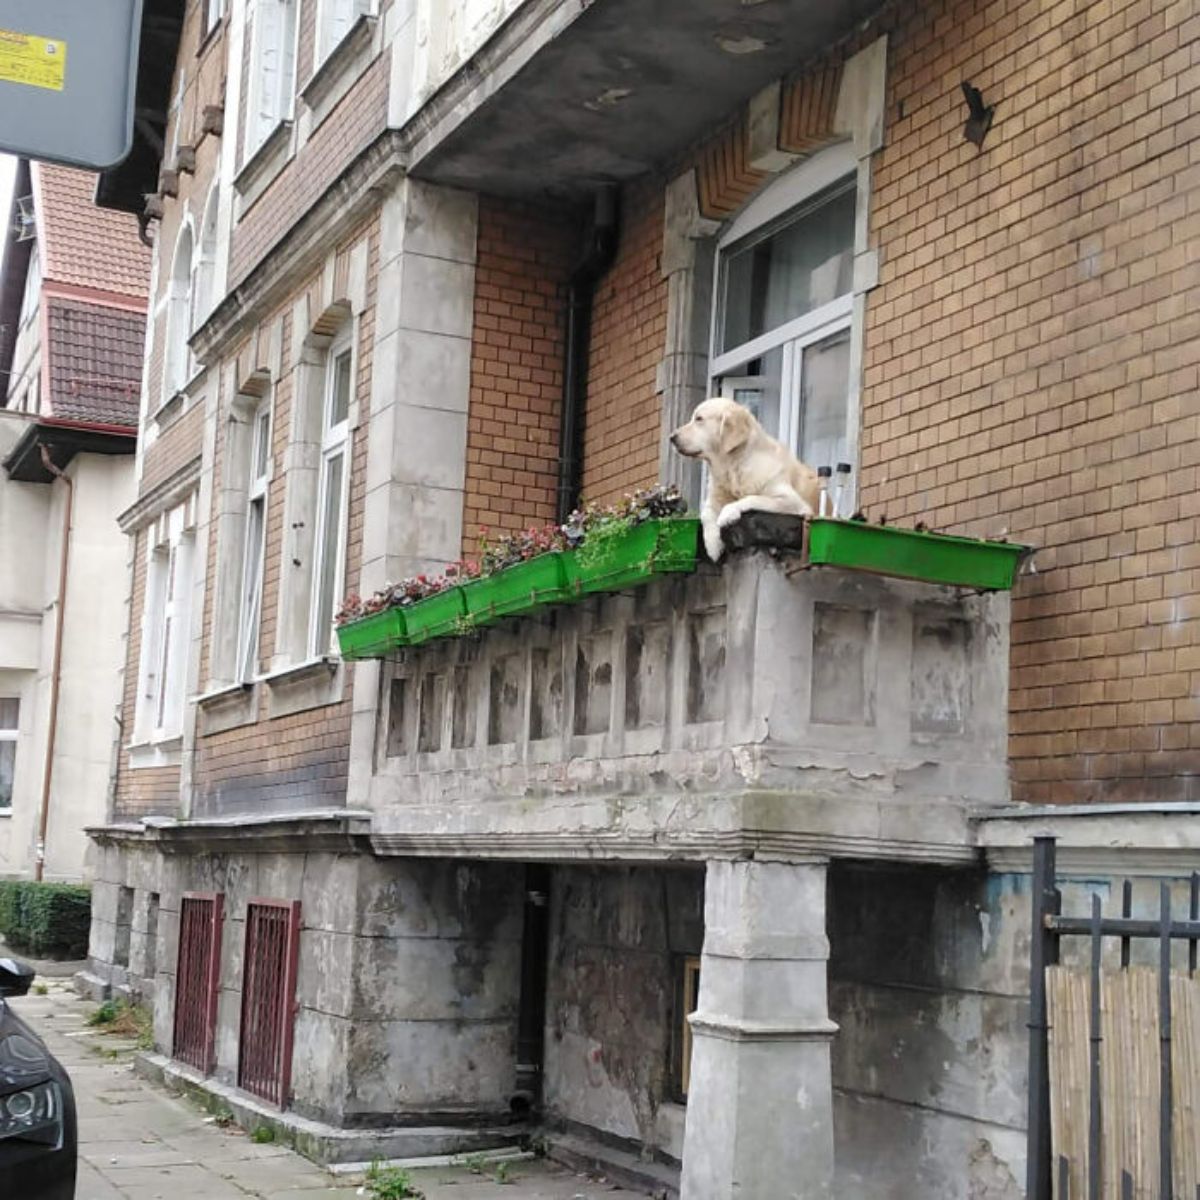 golden retriever hanging over a balcony next to green flower pots with flowers